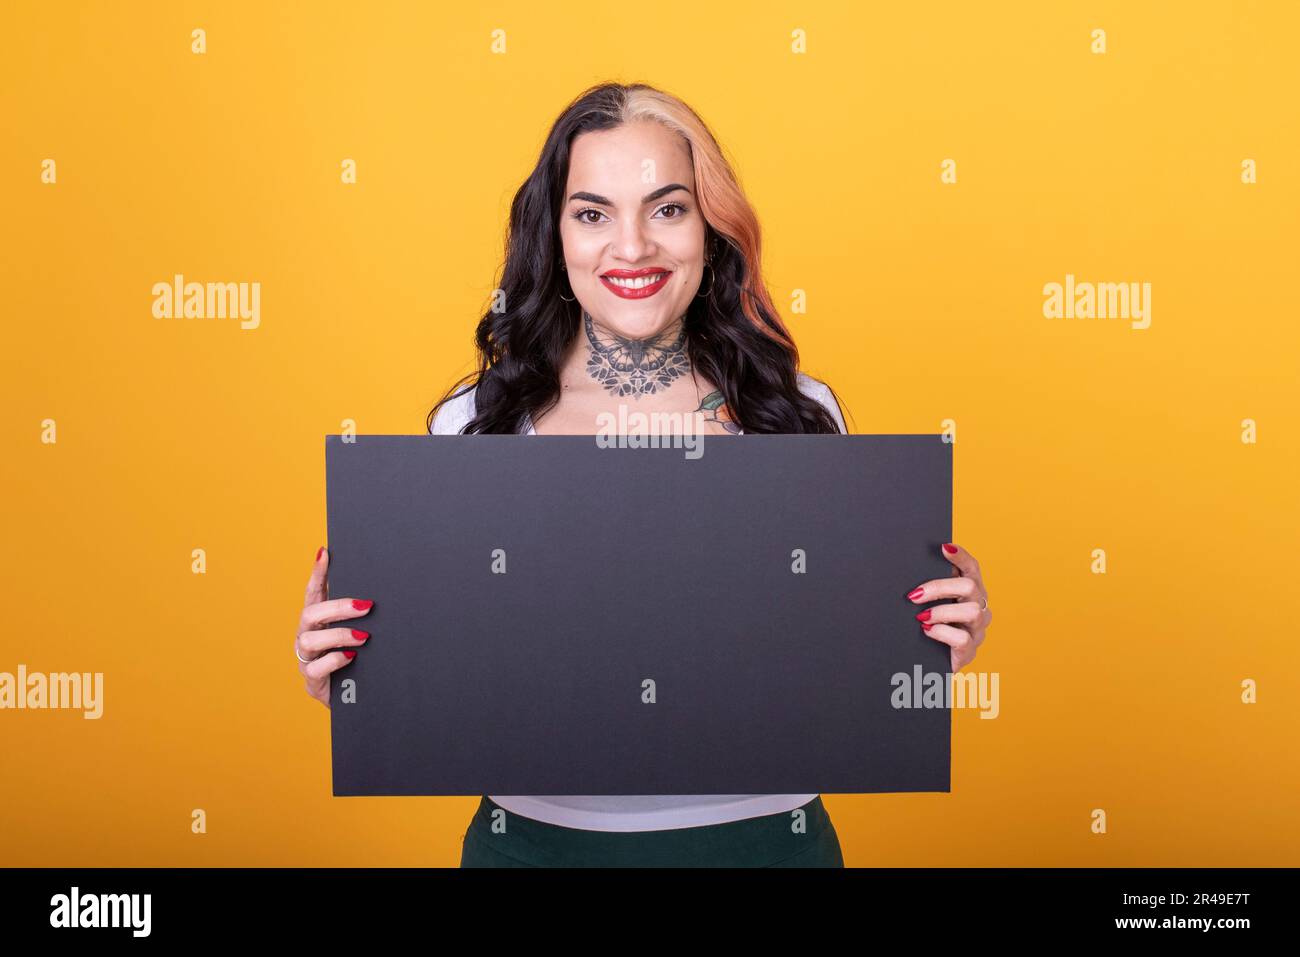 Beautiful woman holding a blank sign against a yellow background Stock Photo